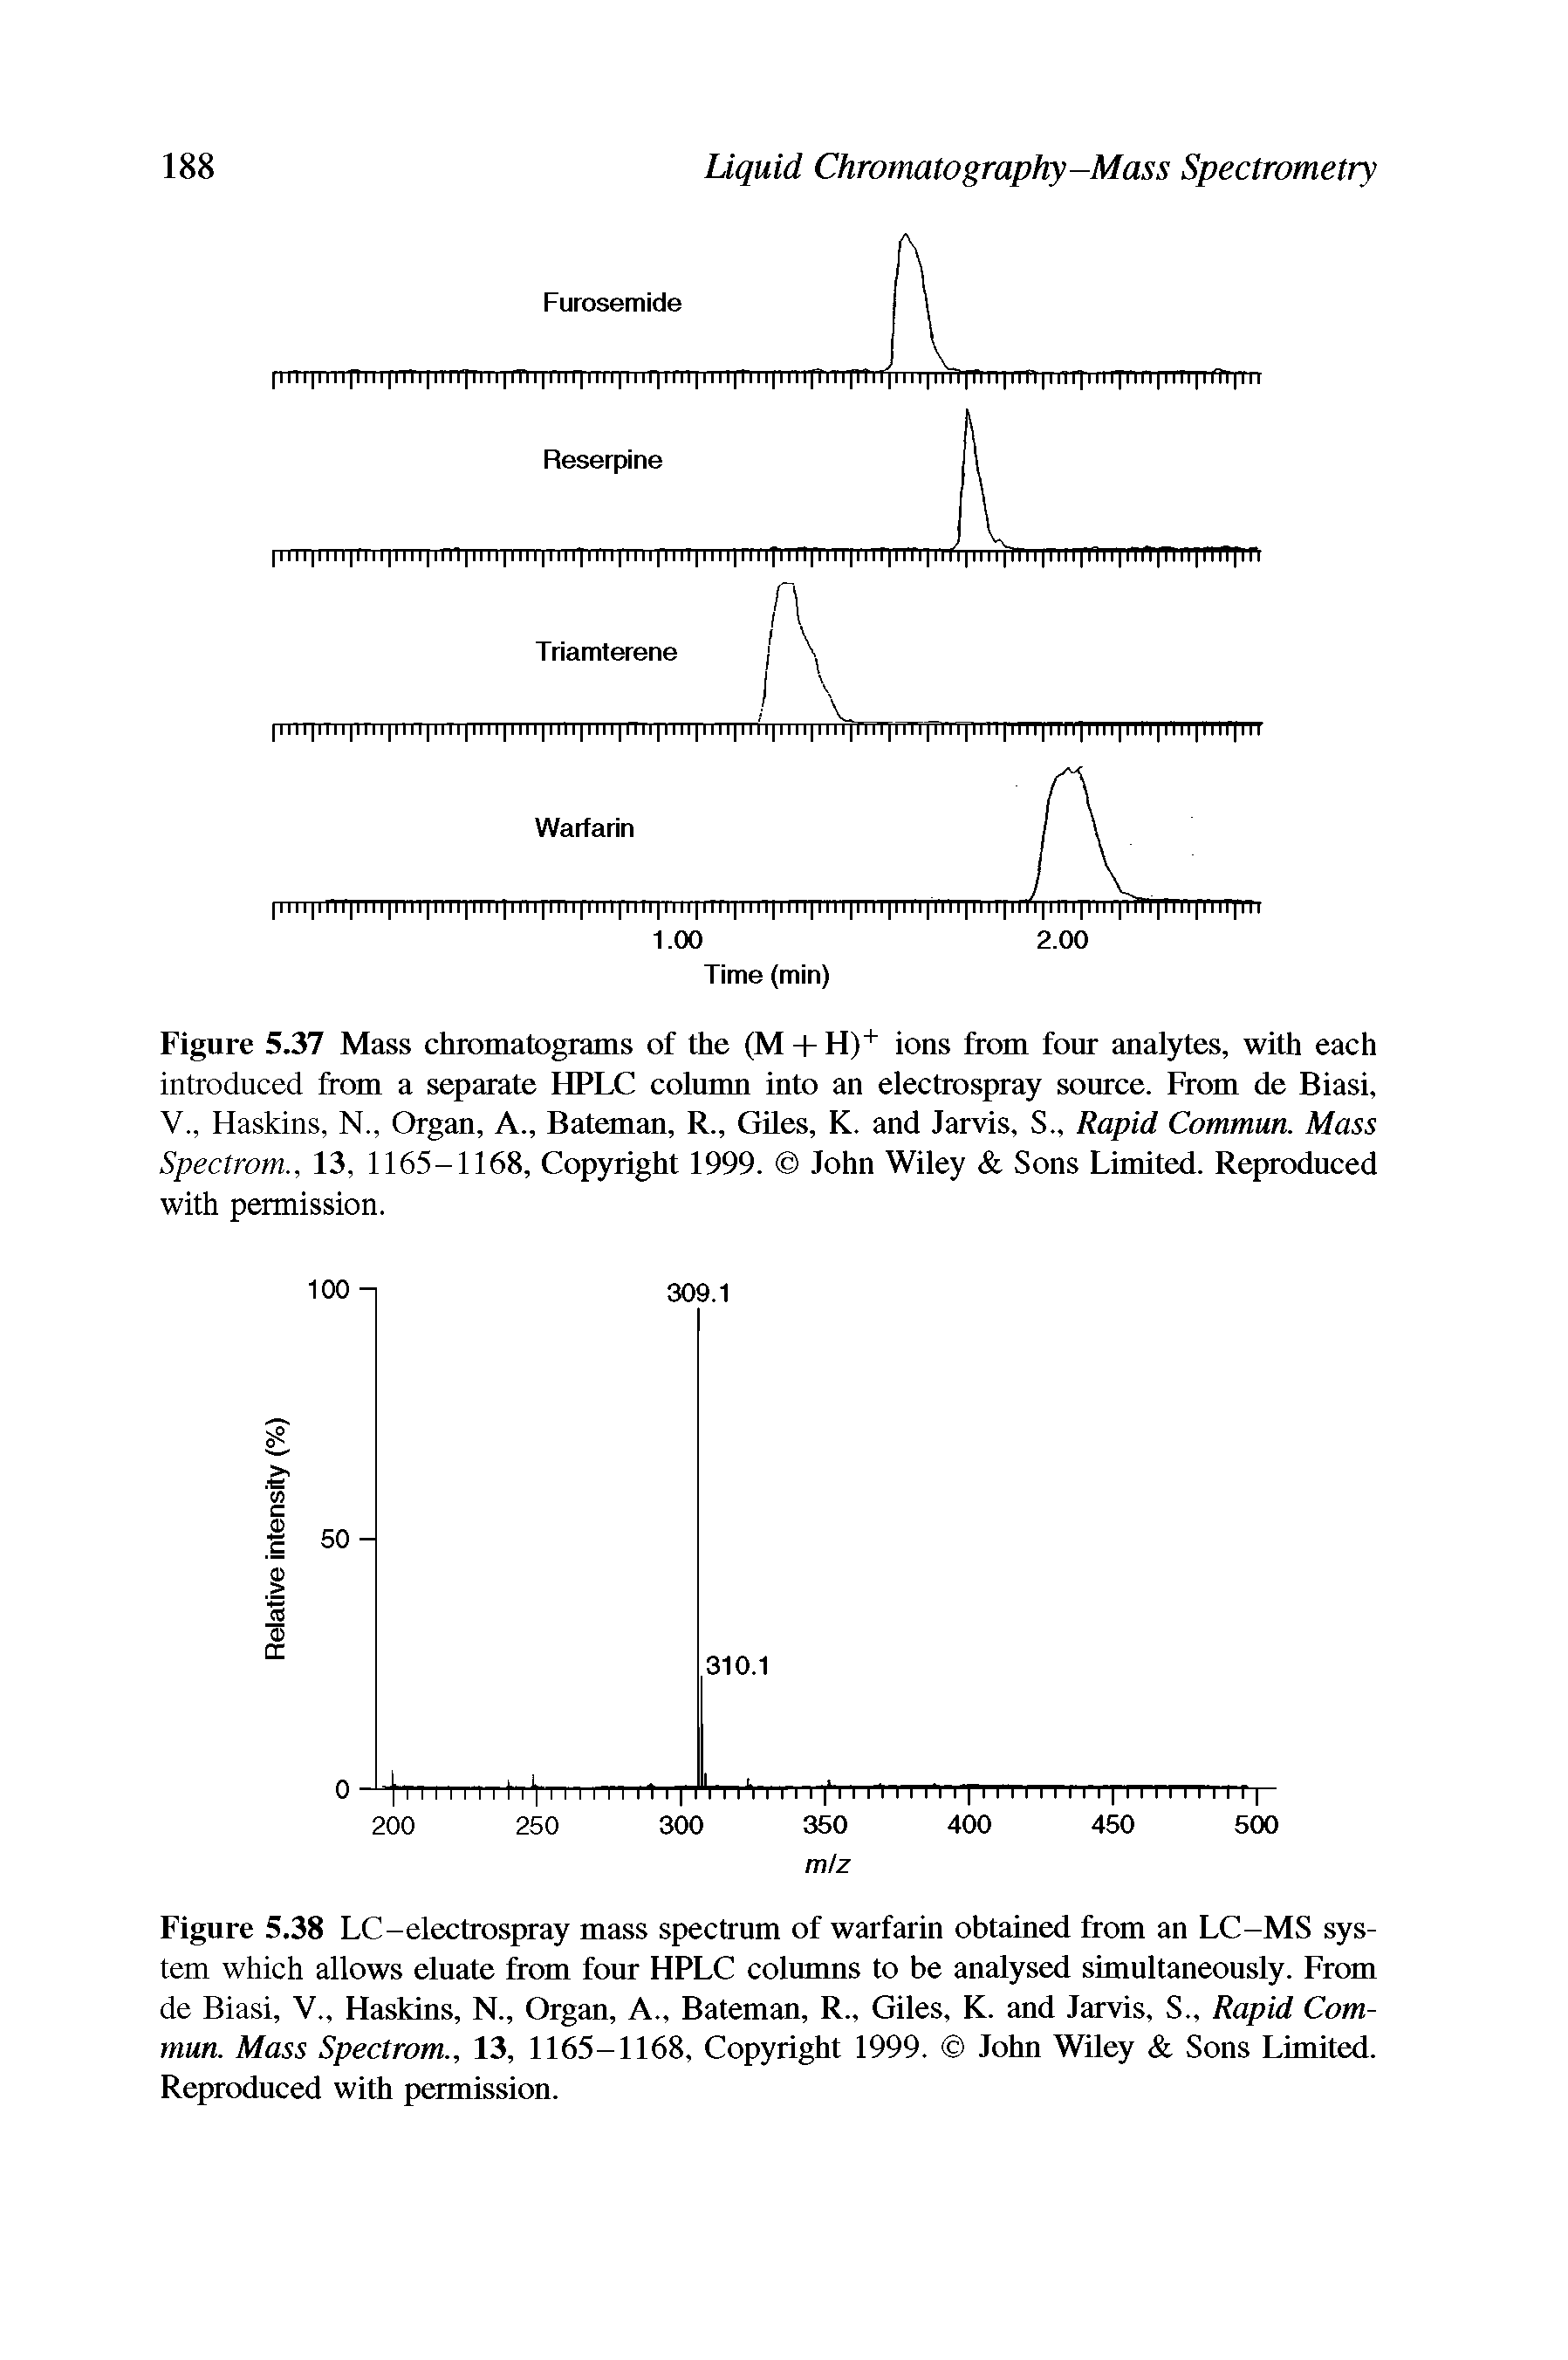 Figure 5.37 Mass chromatograms of the (M + H) ions from four analytes, with each introduced from a separate HPLC column into an electrospray source. From de Biasi, V., Haskins, N., Organ, A., Bateman, R., Giles, K. and Jarvis, S., Rapid Commun. Mass Spectrom., 13, 1165-1168, Copyright 1999. John Wiley Sons Limited. Reproduced with permission.